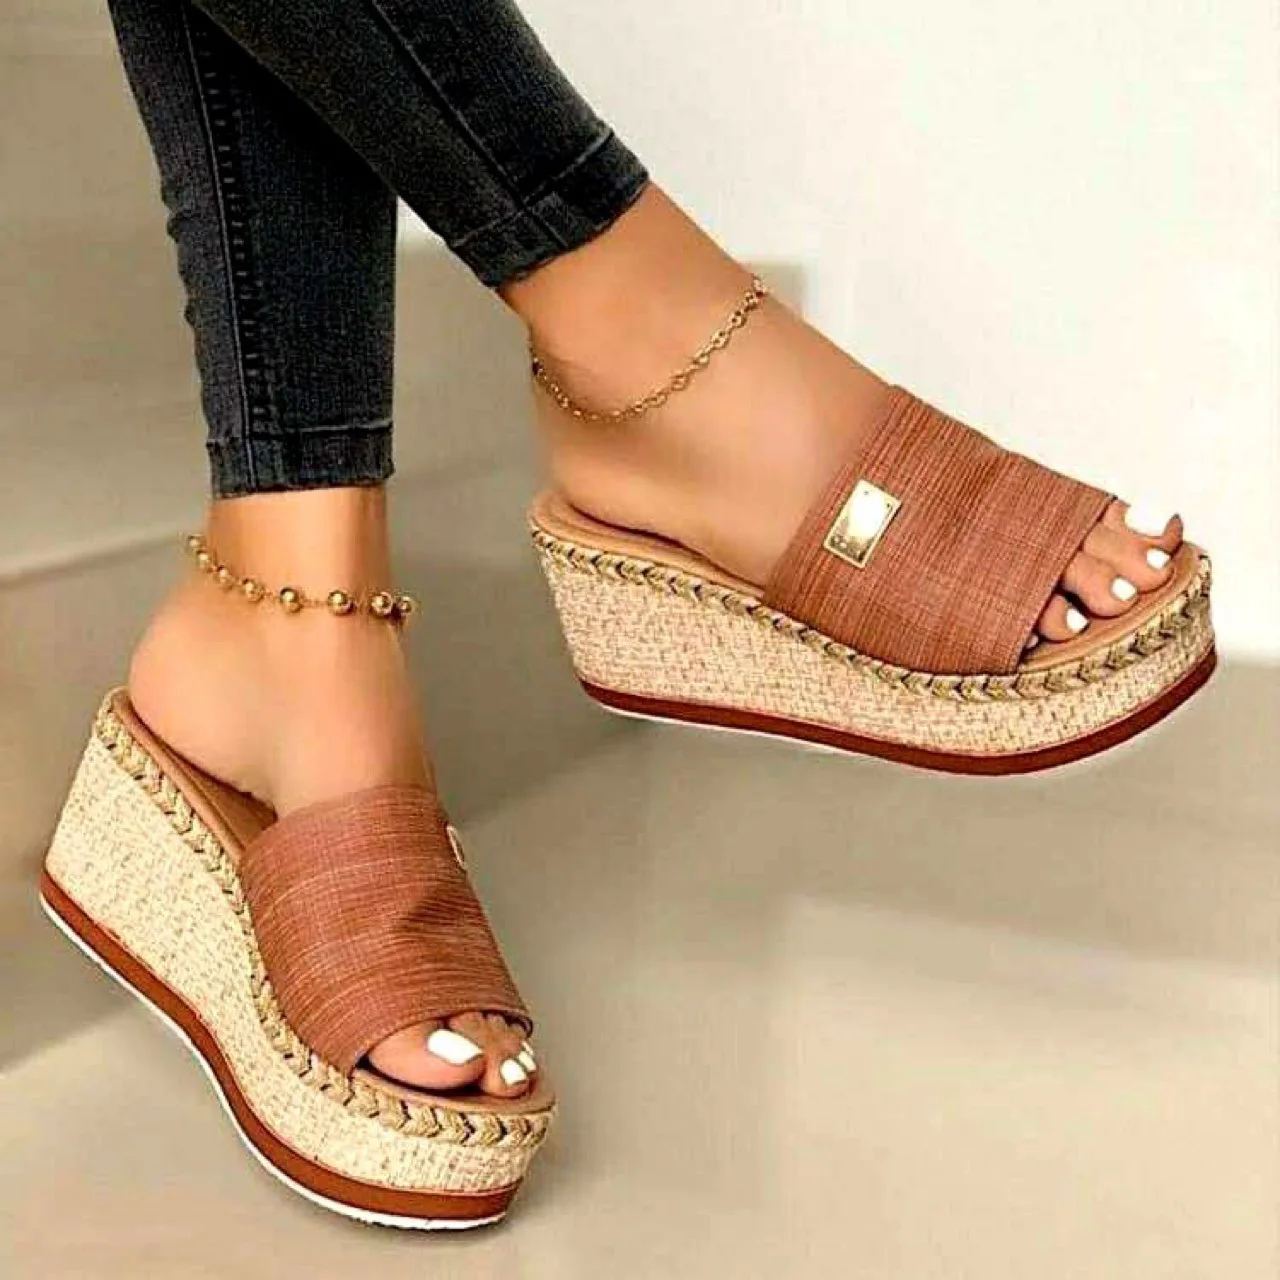 

2021 Summer Women's Fish Mouth Fashion Sandals Increased Wedge Heel Charming Women's Shoes, As shown